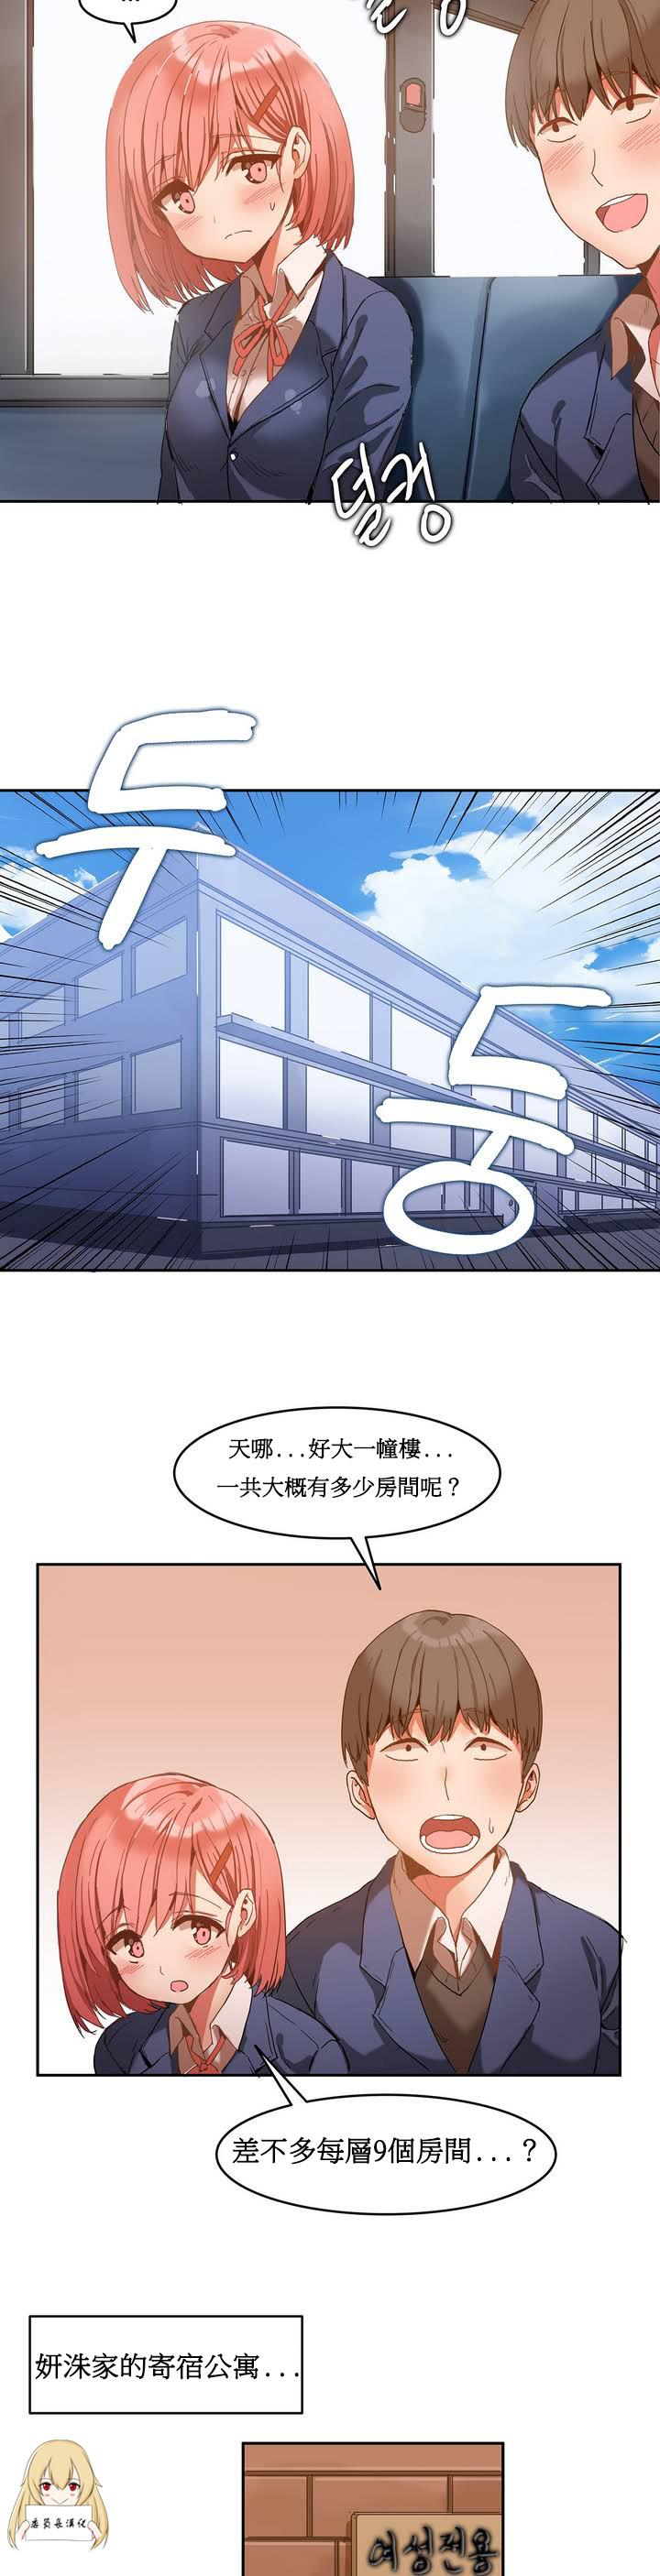 Chacal Hahri's Lumpy Boardhouse Ch. 0~30【委員長個人漢化】（持續更新） Collar - Page 11